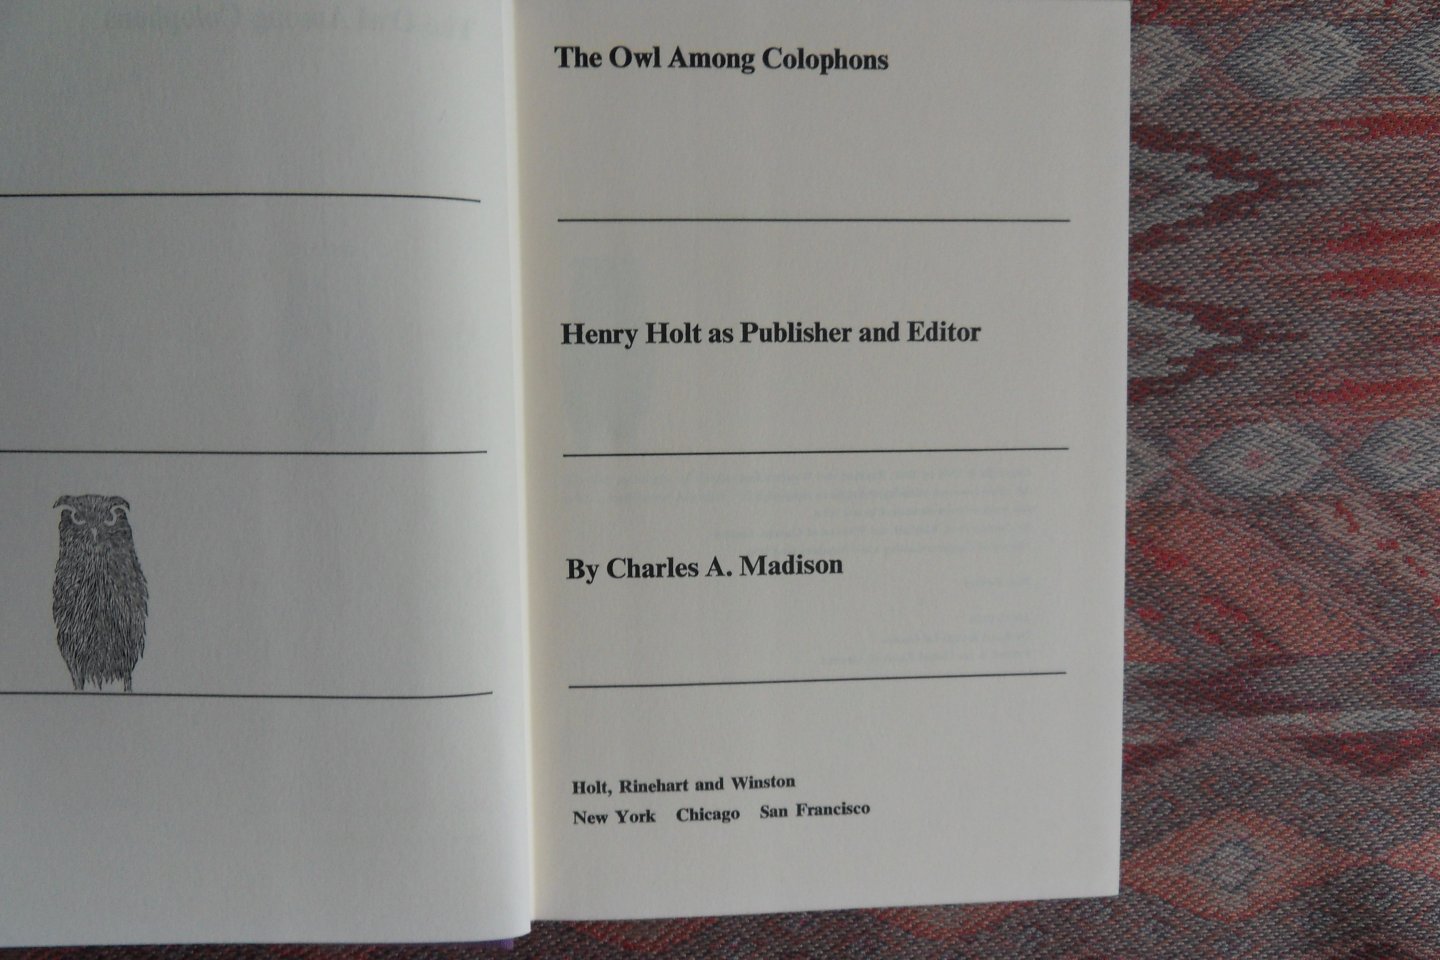 Madison, Charles A. - The Owl Among Colophons. - Henry Holt as Publisher and Editor.